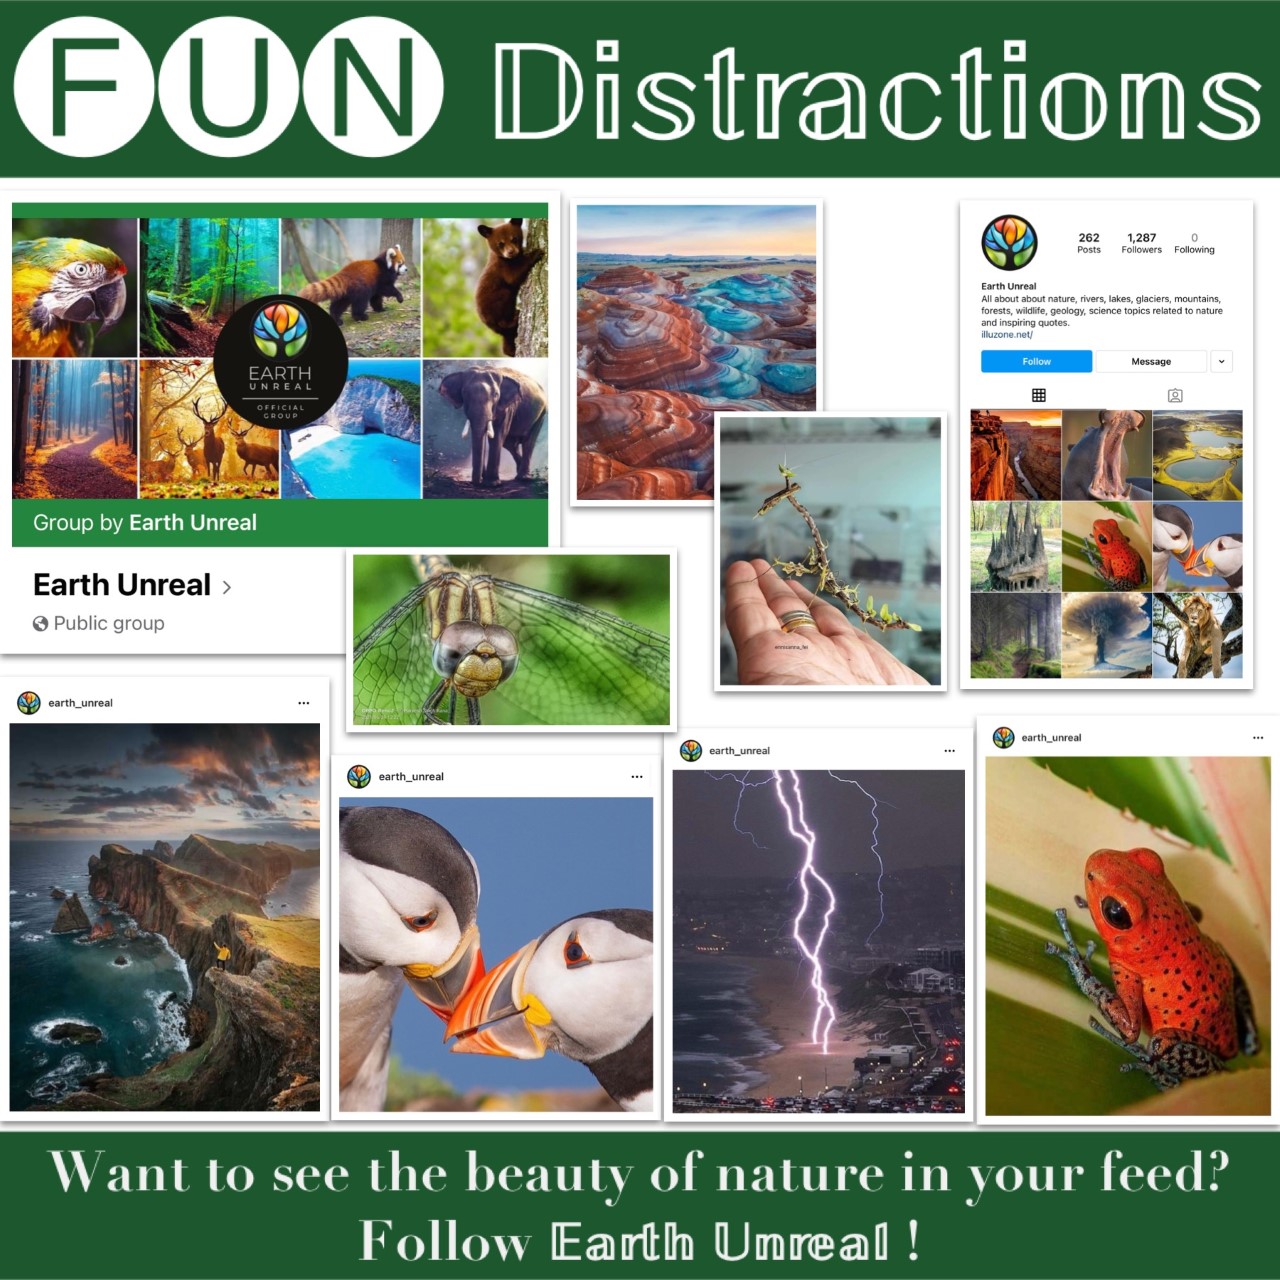  Image advertising the Library’s FUN Distractions series post about Earth Unreal